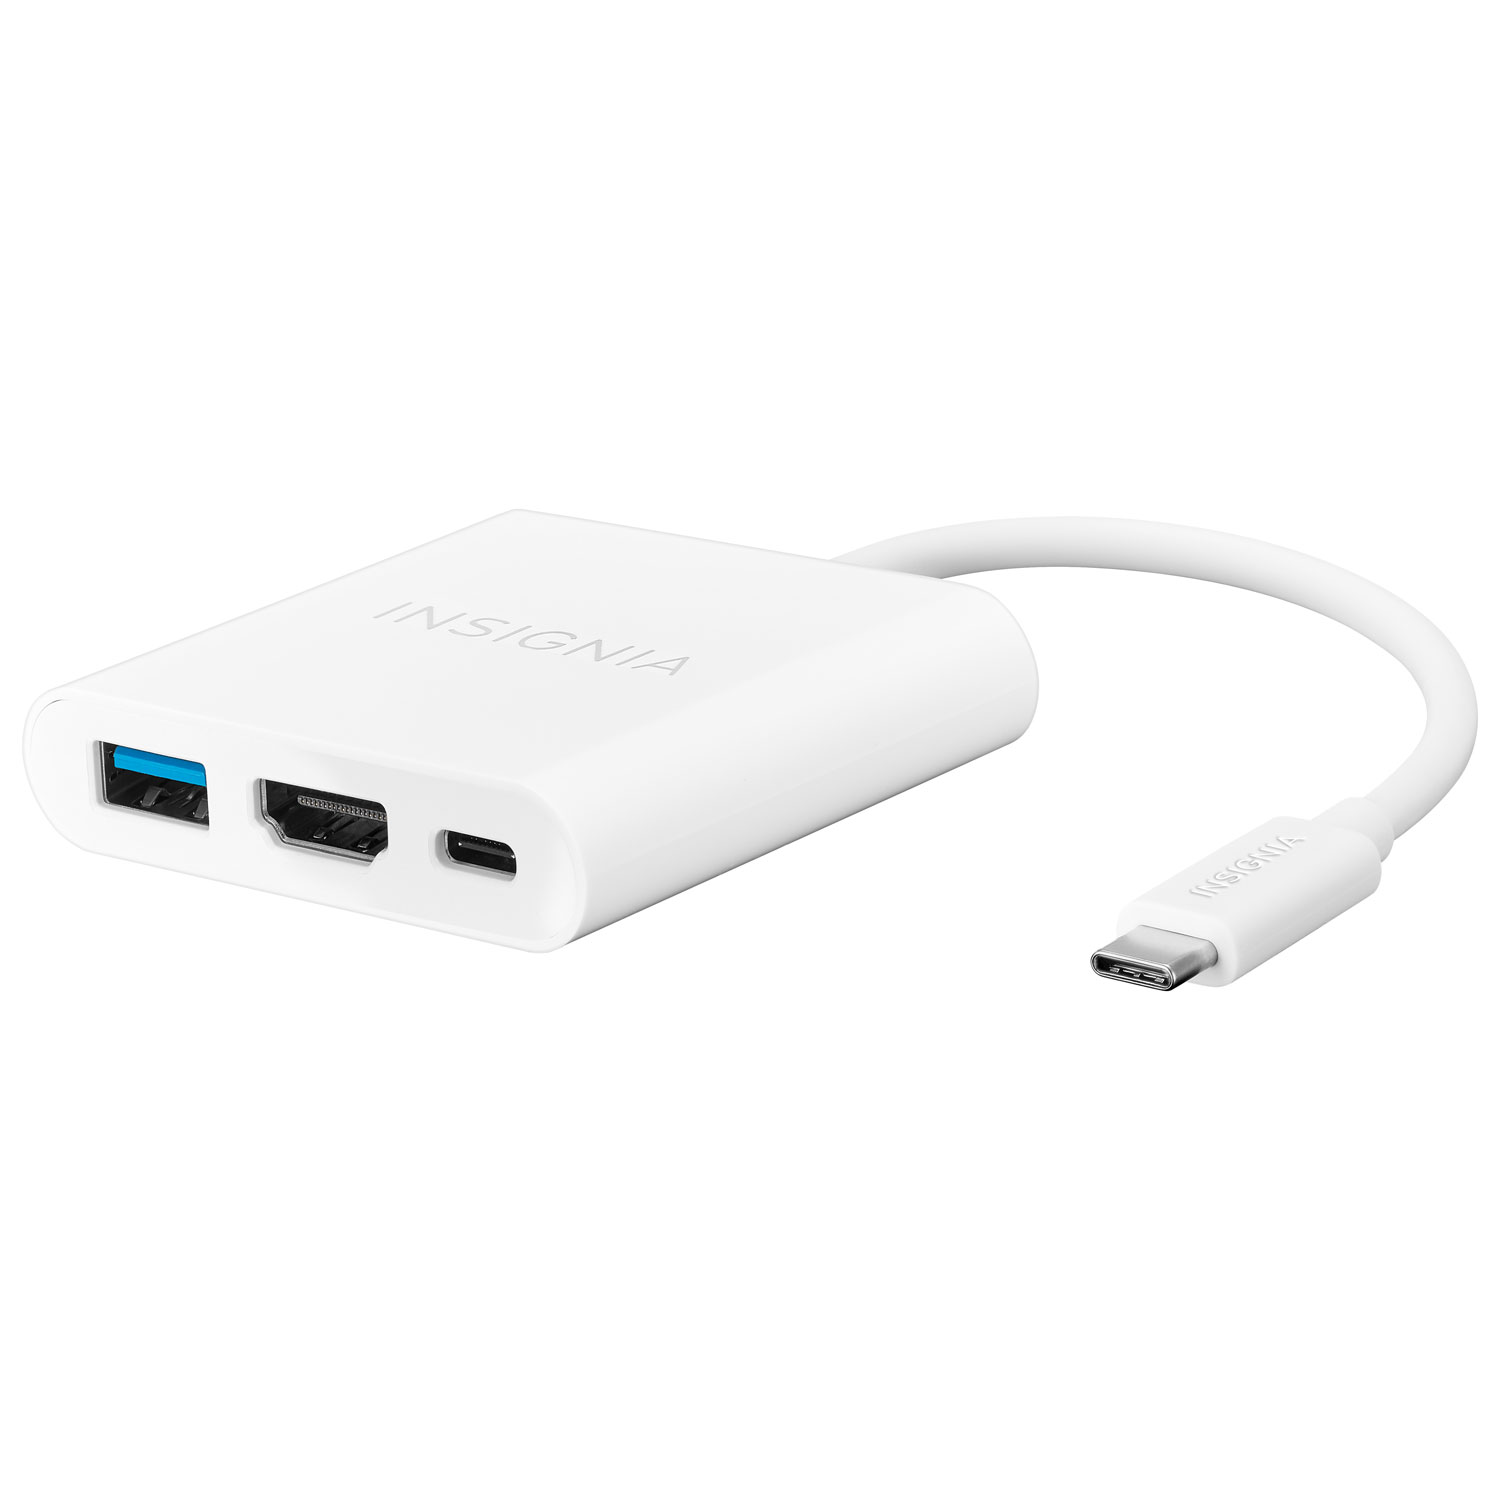 Best Buy essentials™ USB-C to Ethernet Adapter White BE-PA2CEW23 - Best Buy